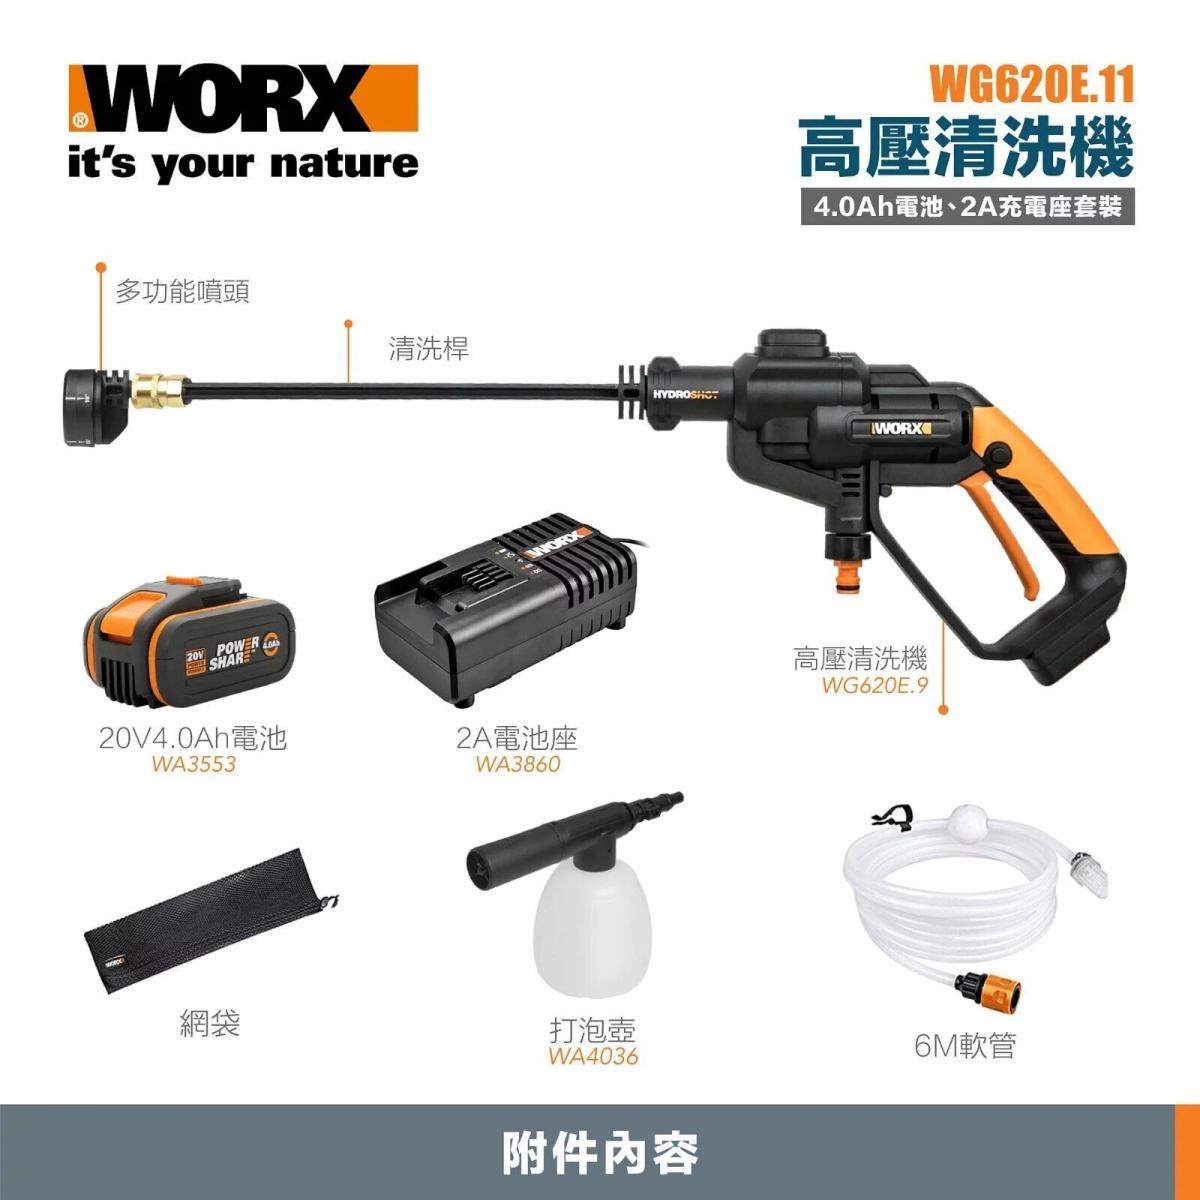 WORX - WG620E.11 high-pressure washer set (with 20V 4.0Ah battery, 2A charging stand) | Wireless car wash water gun | Brushless high-pressure water gun